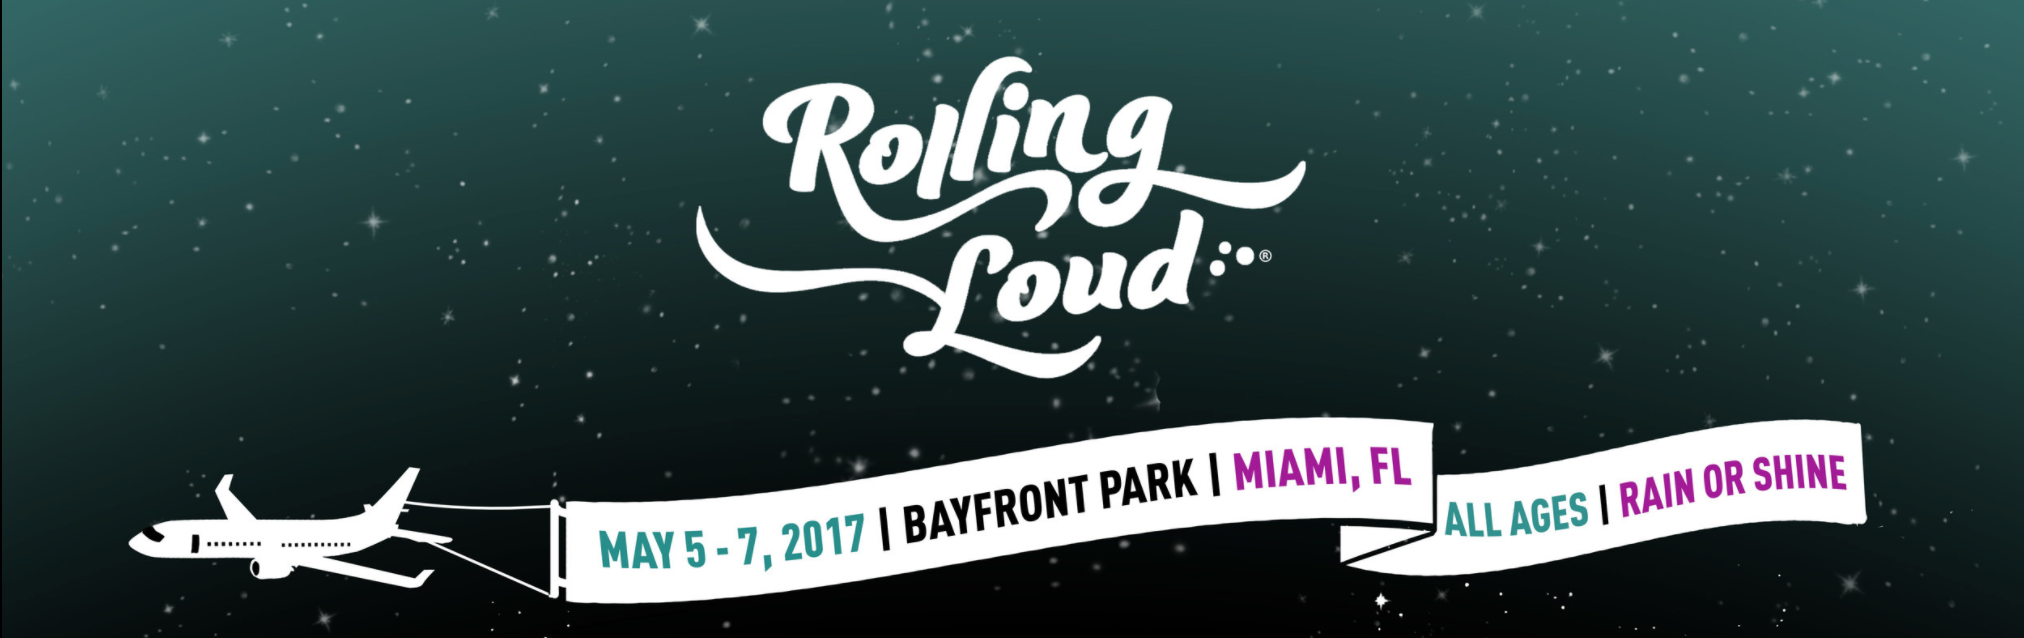 Rolling Loud Festival – 3 Day Pass